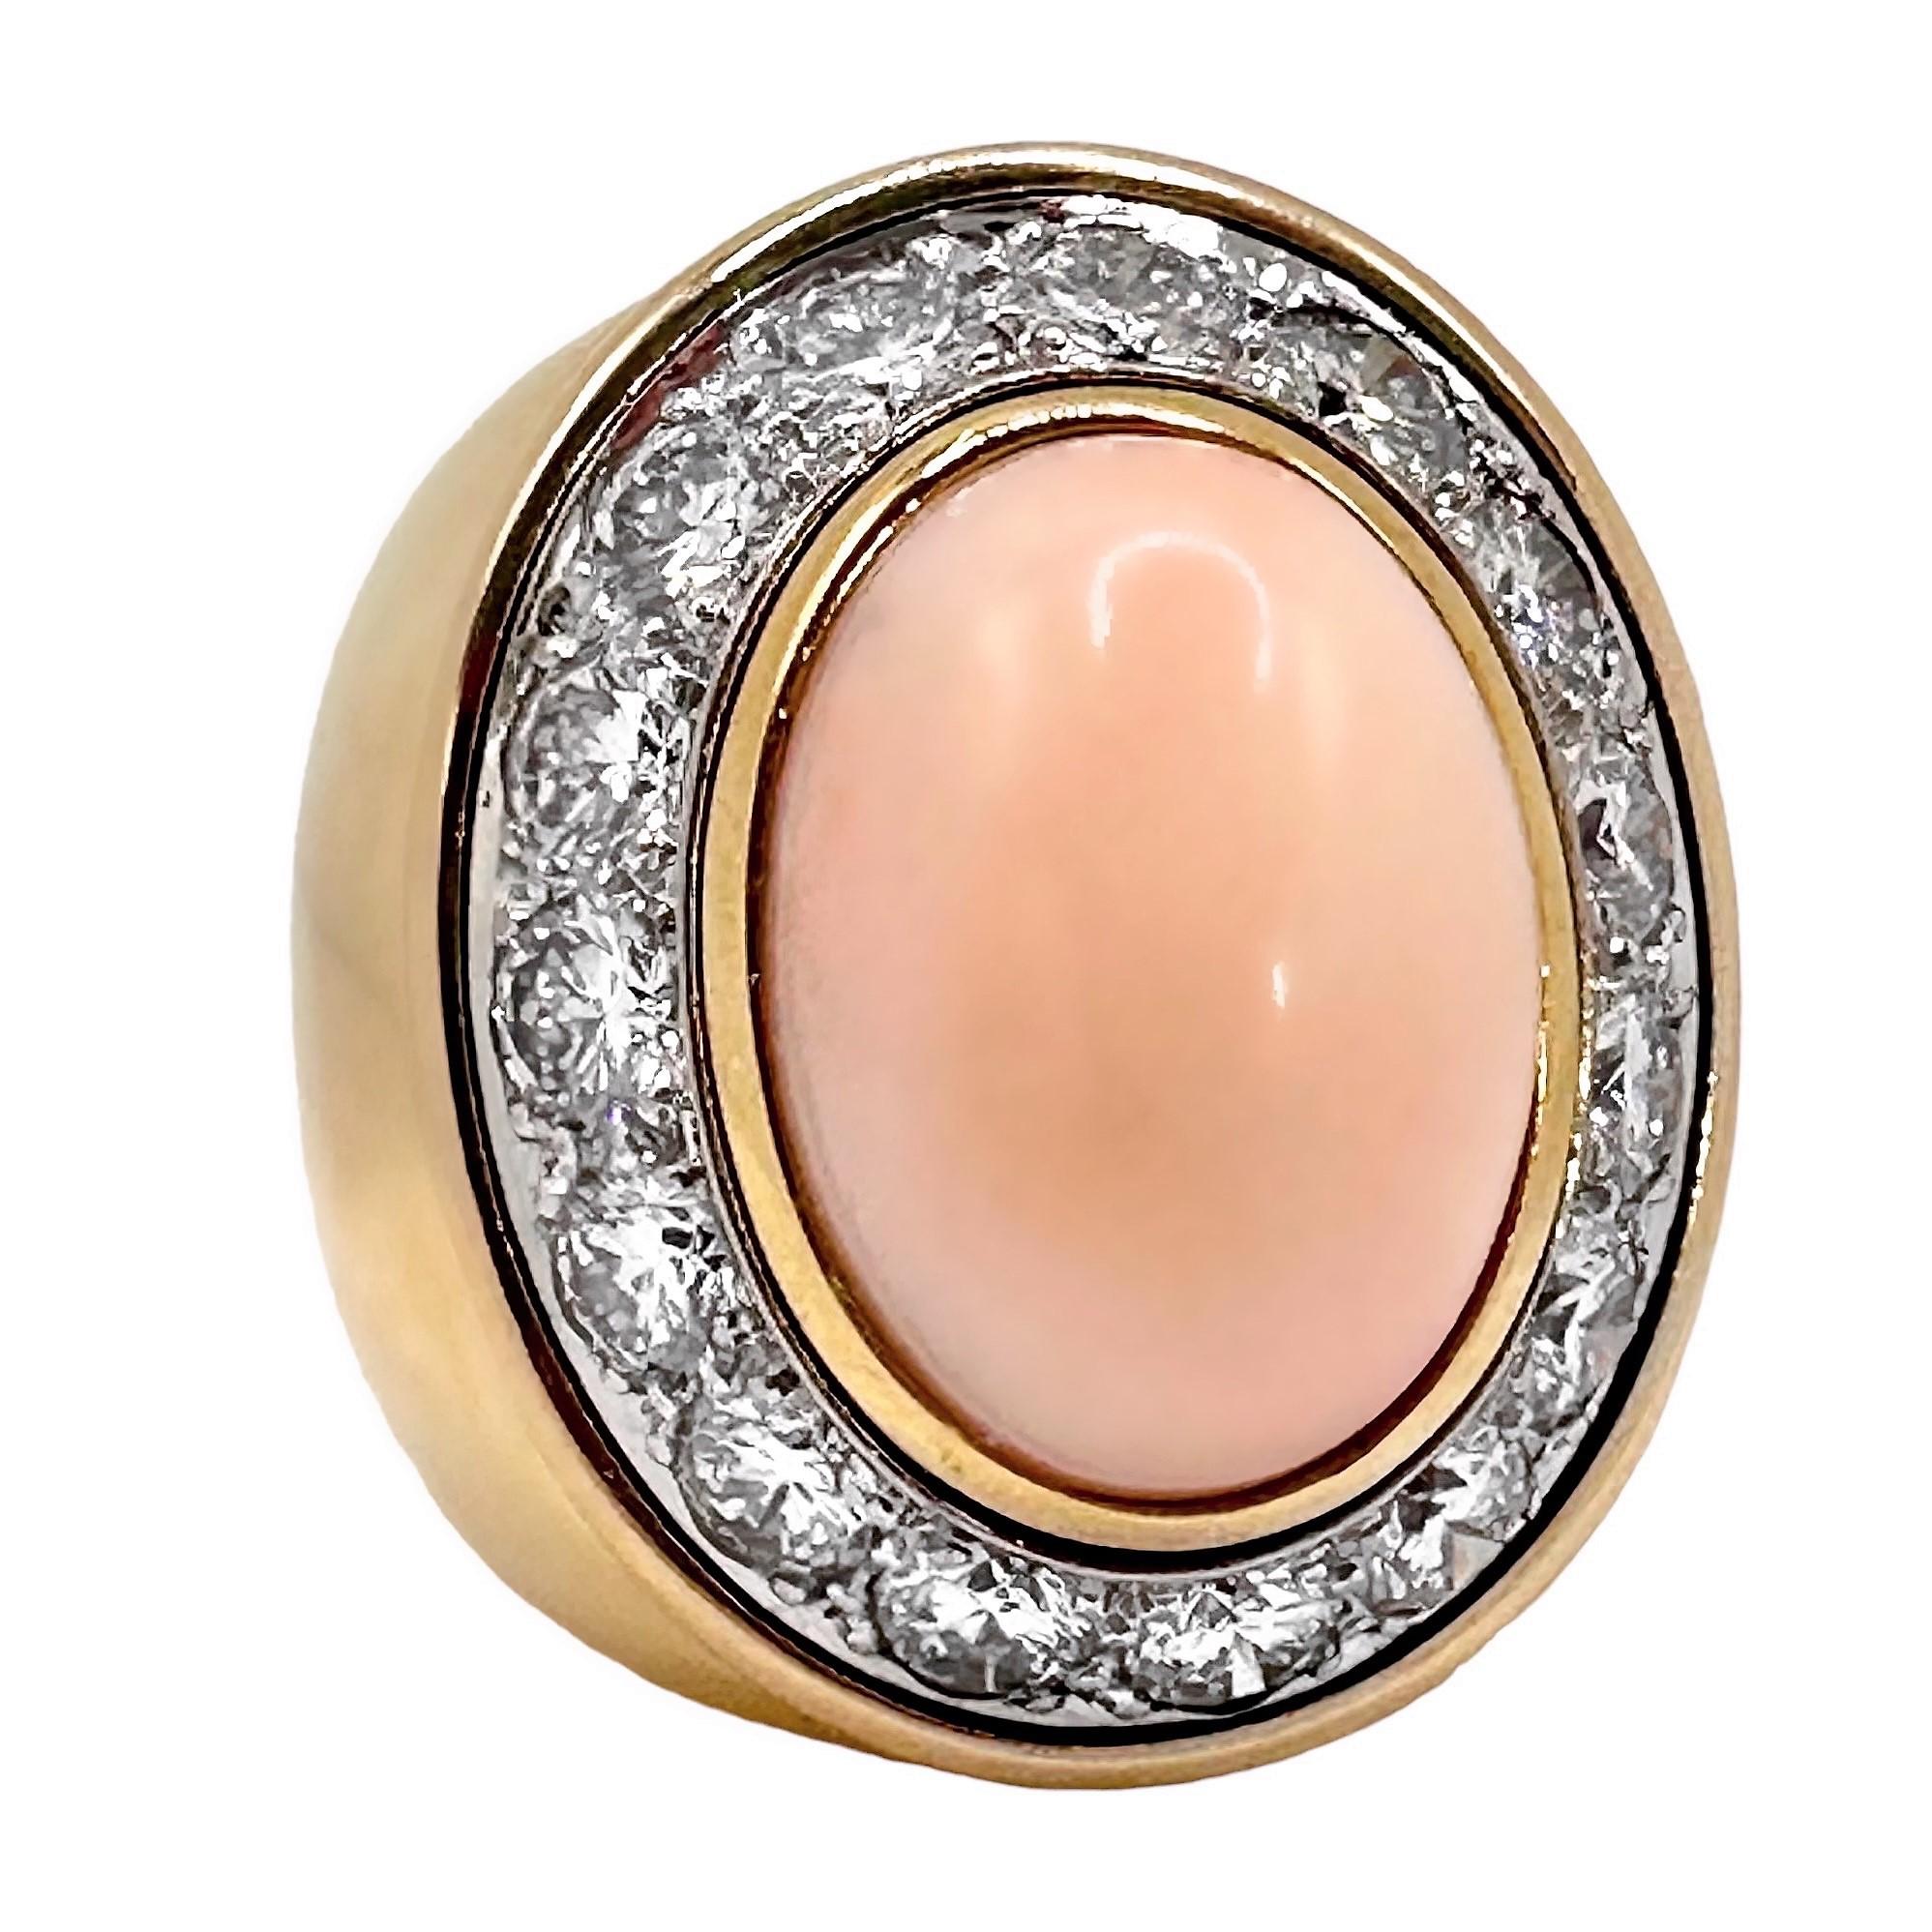 This very large scale, vintage 18K yellow gold ring has, at it's center, one oval shaped, bezel set,  20mm by 14mm angel skin coral cabochon. Surrounding the cabochon are fifteen brilliant cut diamonds having a total approximate weight of 5.00ct of